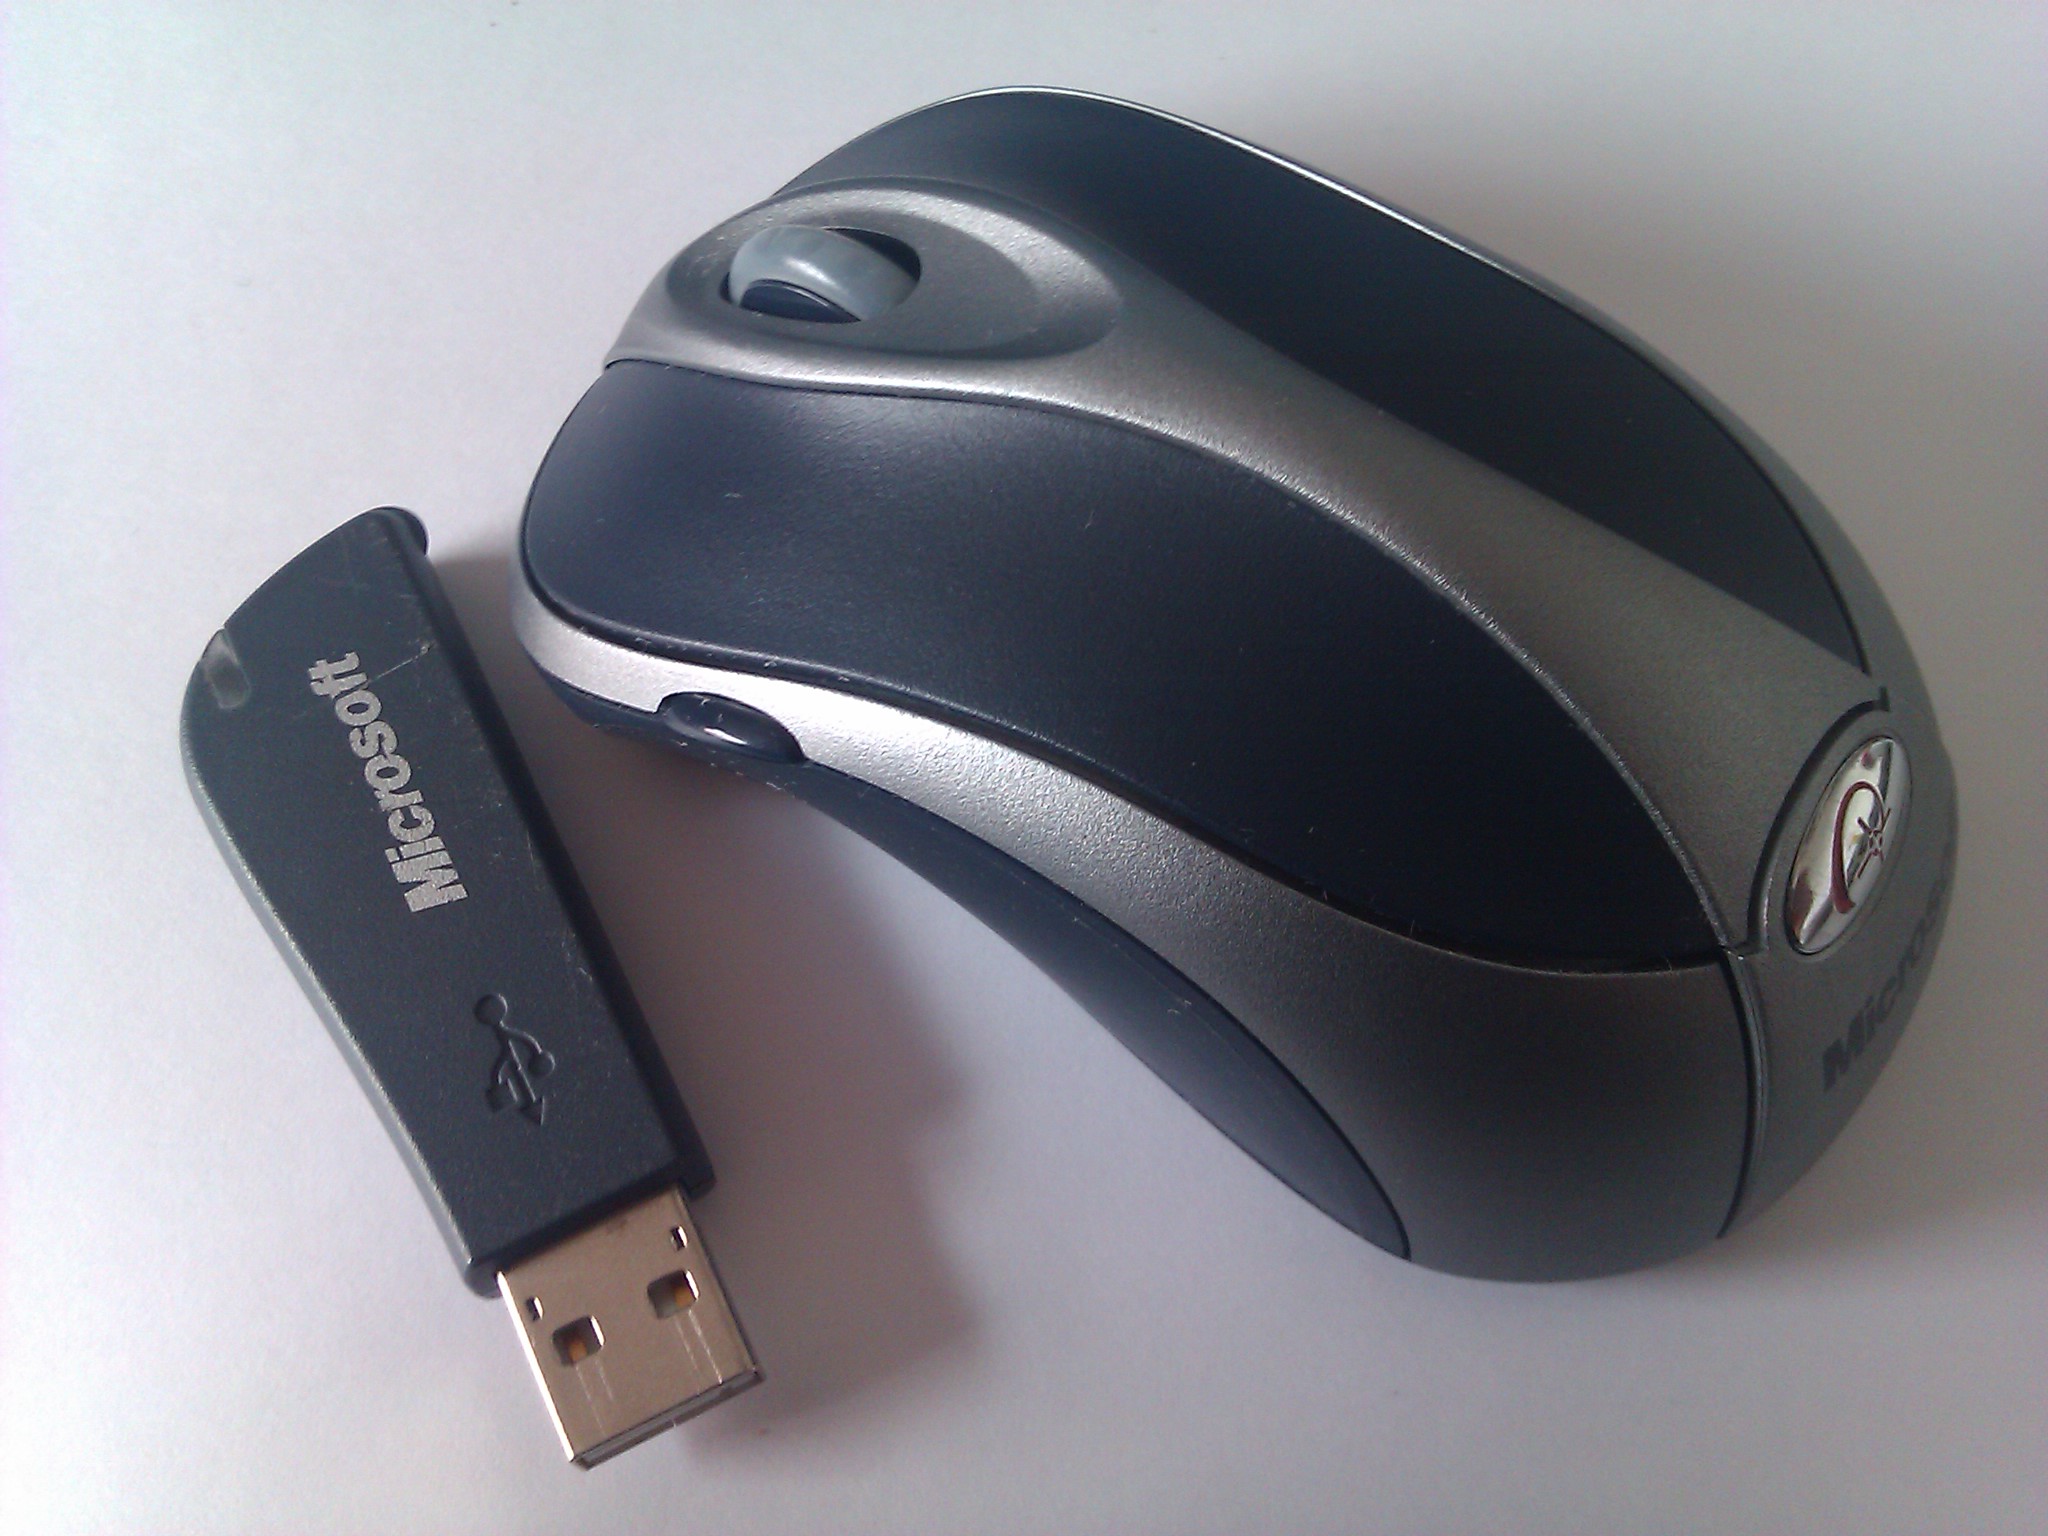 microsoft wireless mouse driver download